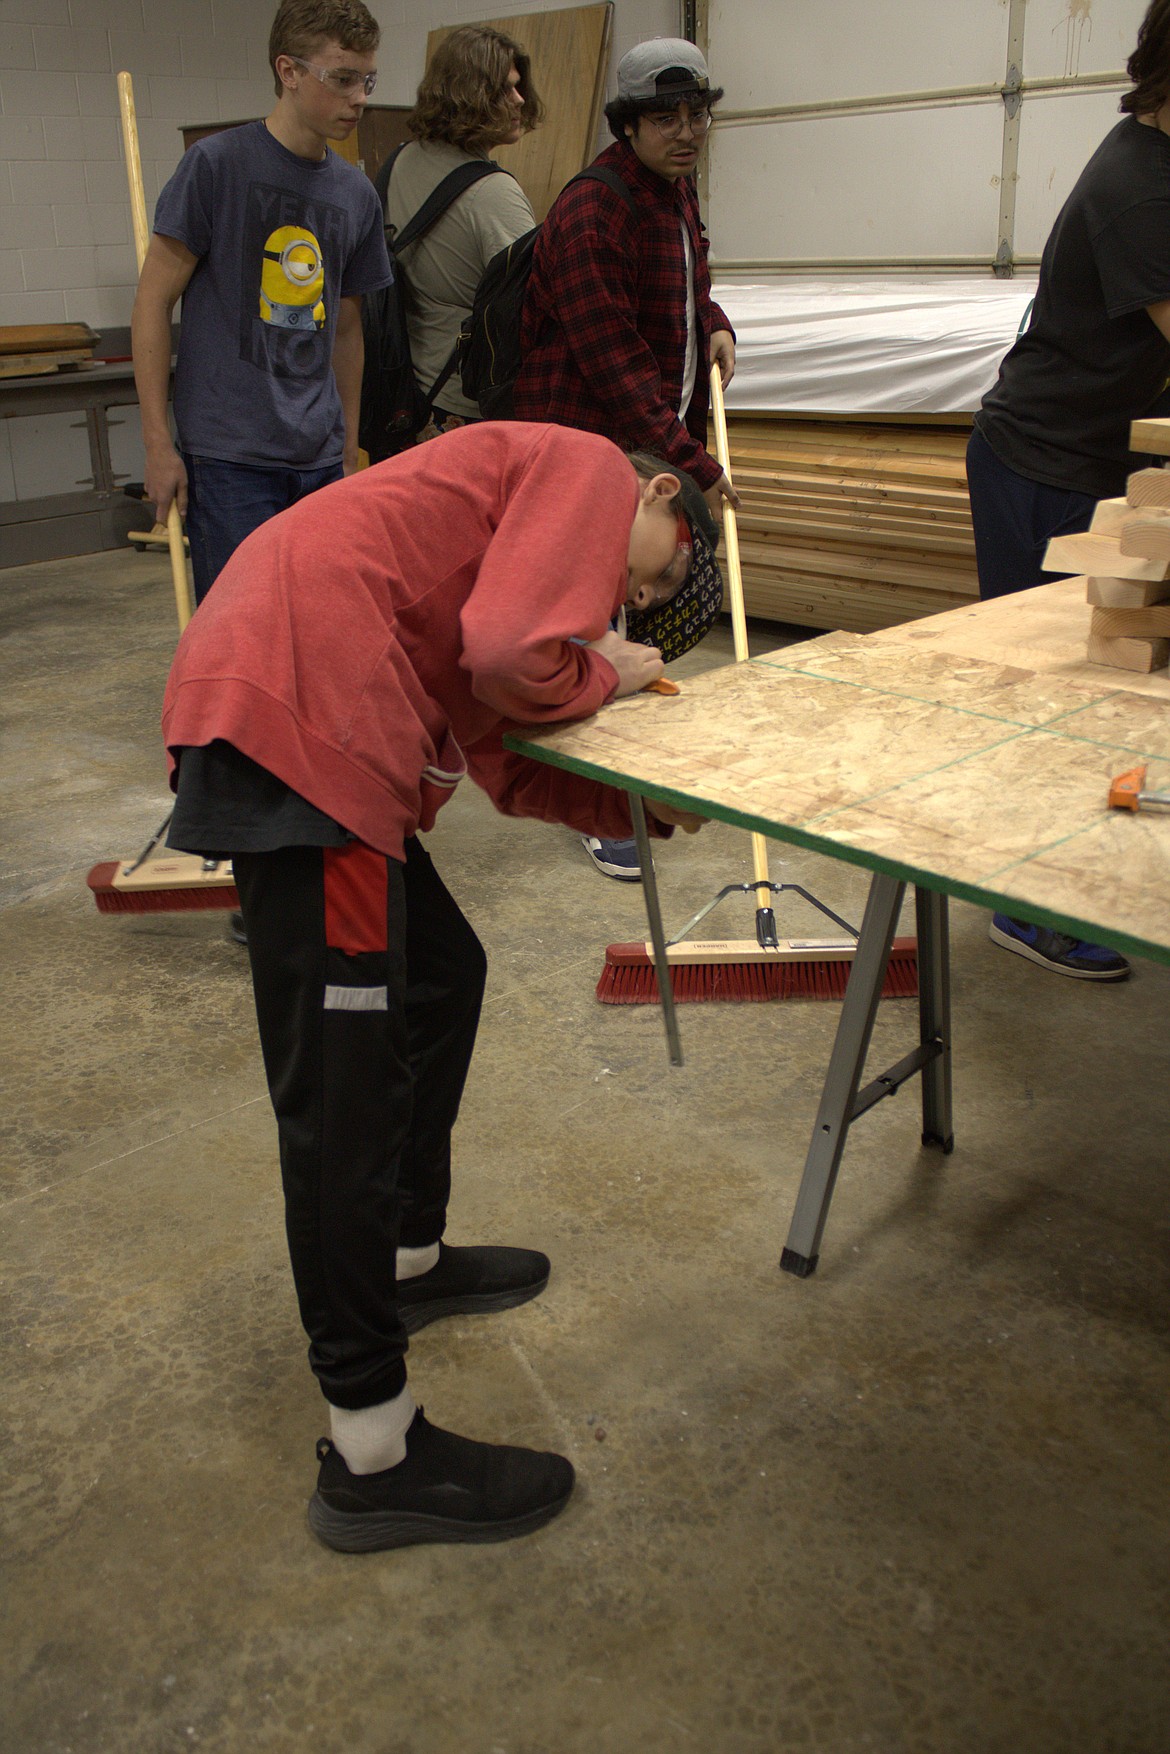 Students in Stephen Wimer's Residential Carpentry class at Sandpoint clean up at the end of class.